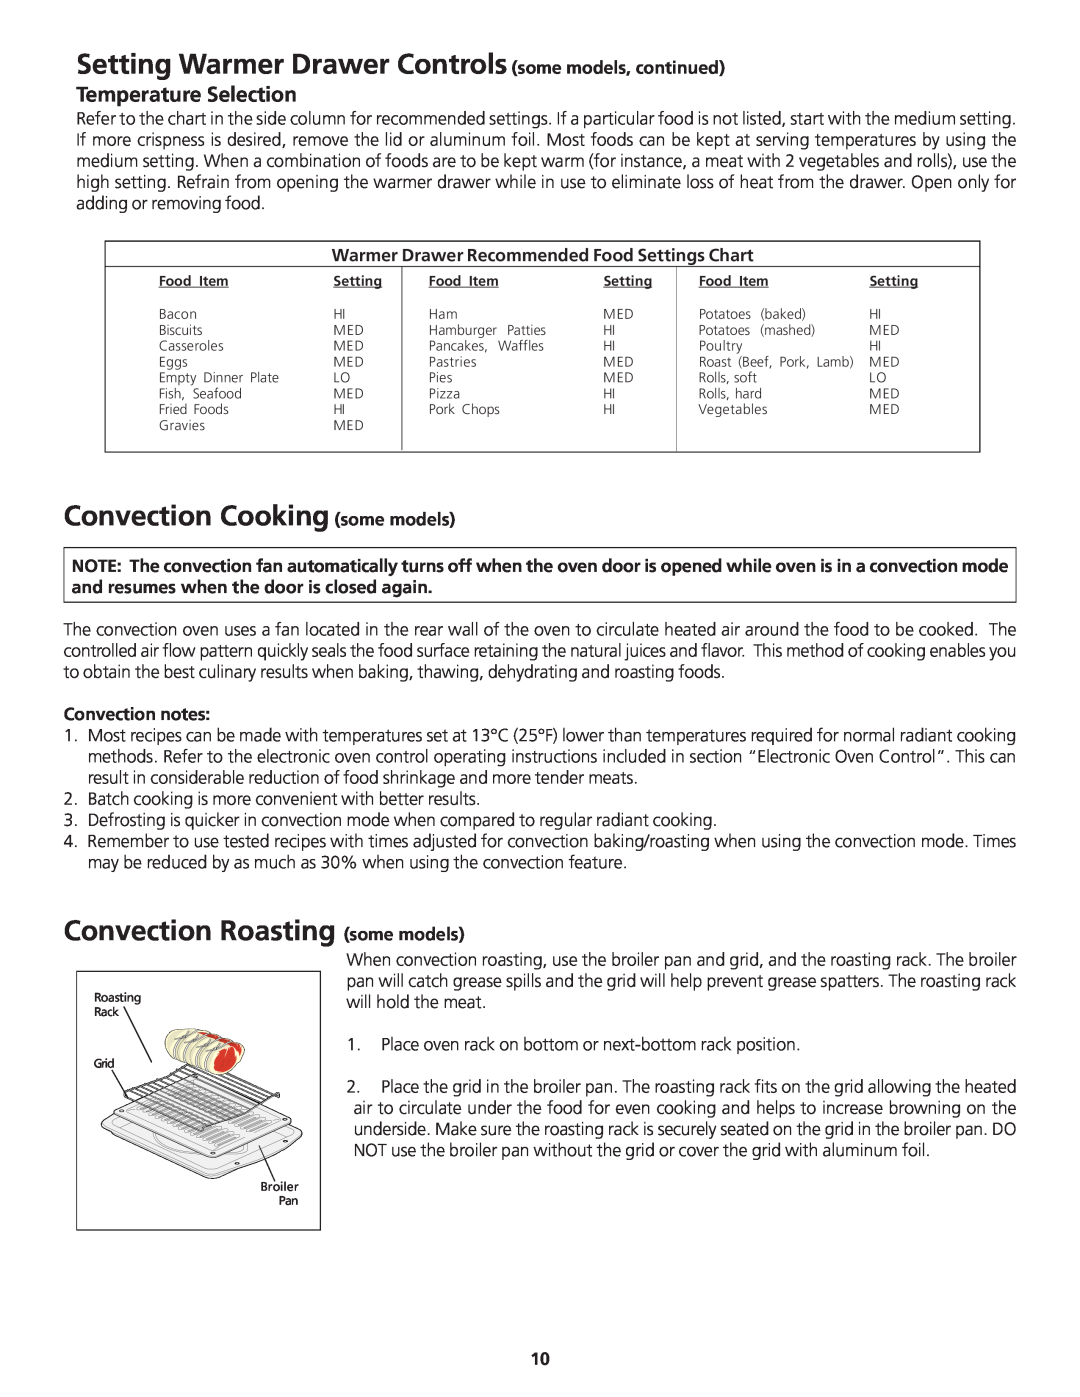 Frigidaire 318200869 manual Setting Warmer Drawer Controls some models, continued, Convection Cooking some models 